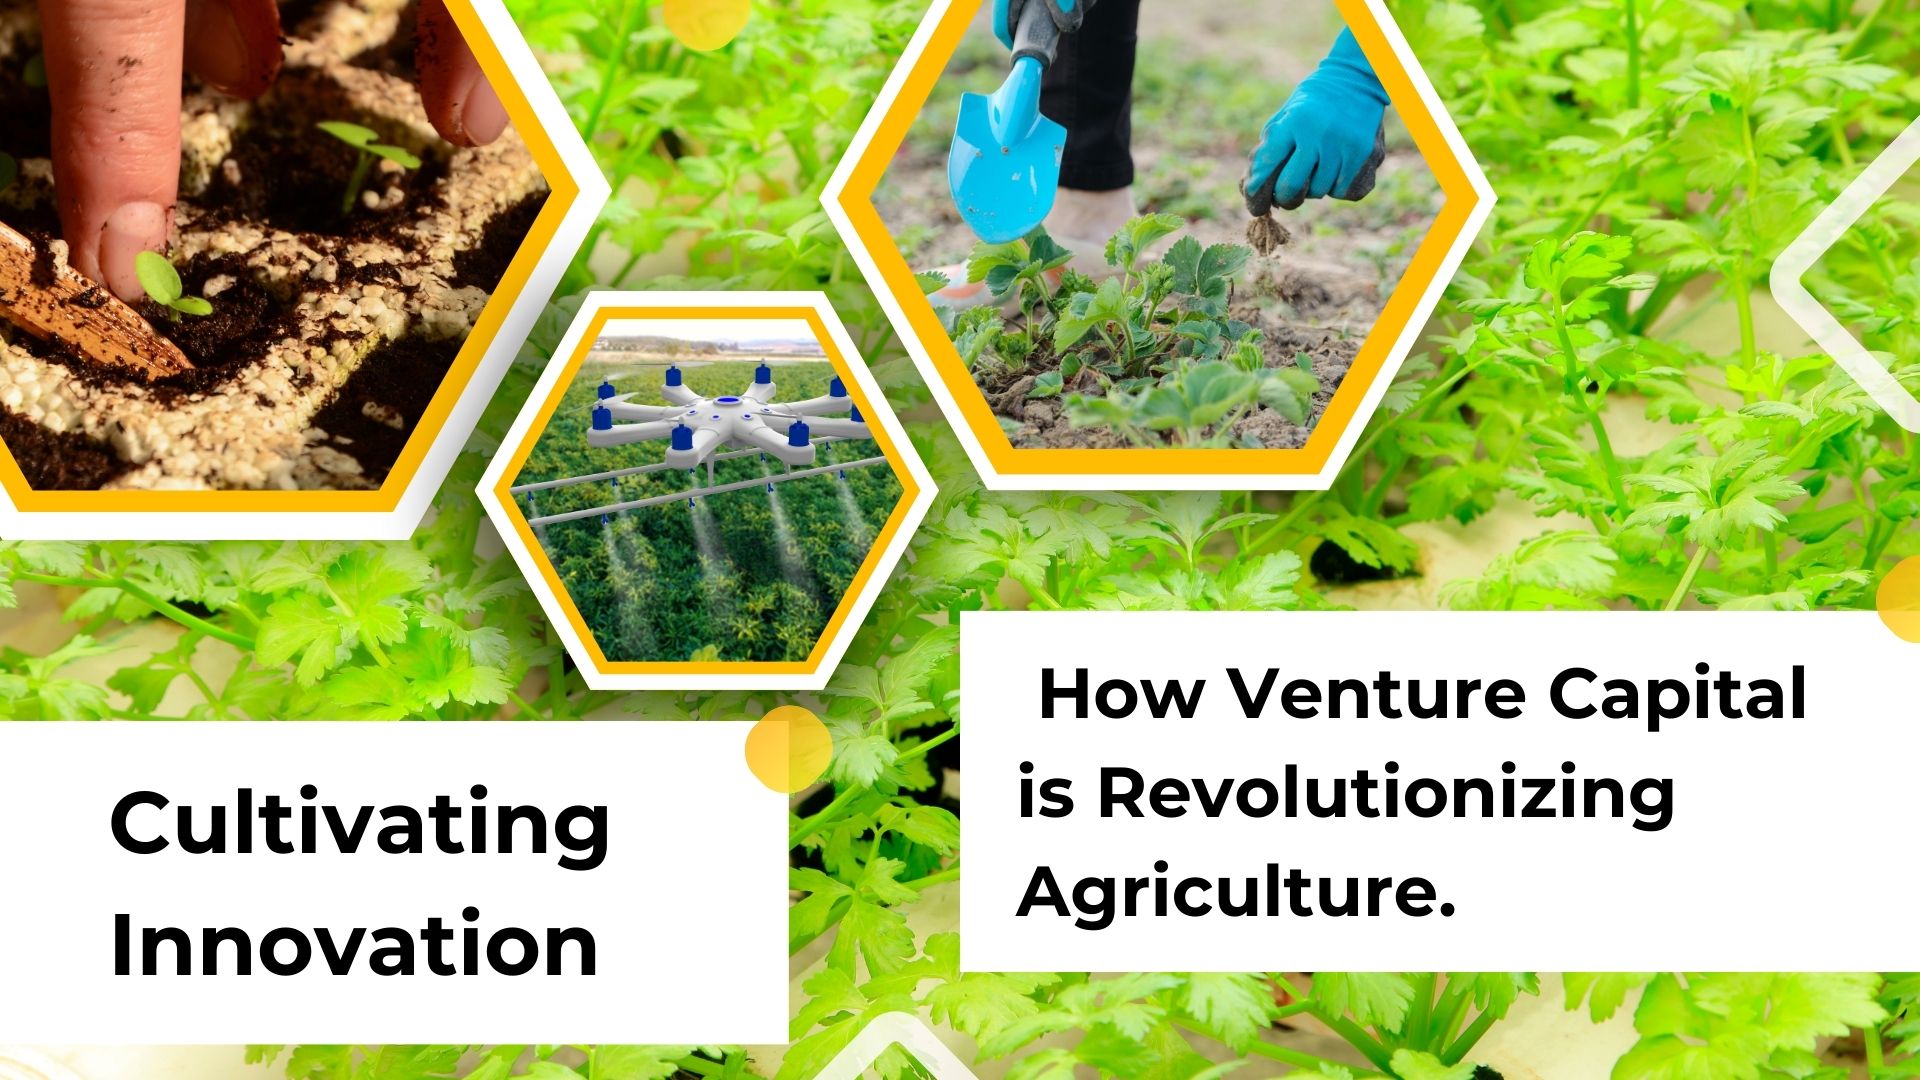 Cultivating Innovation: How Venture Capital is Revolutionizing Agriculture